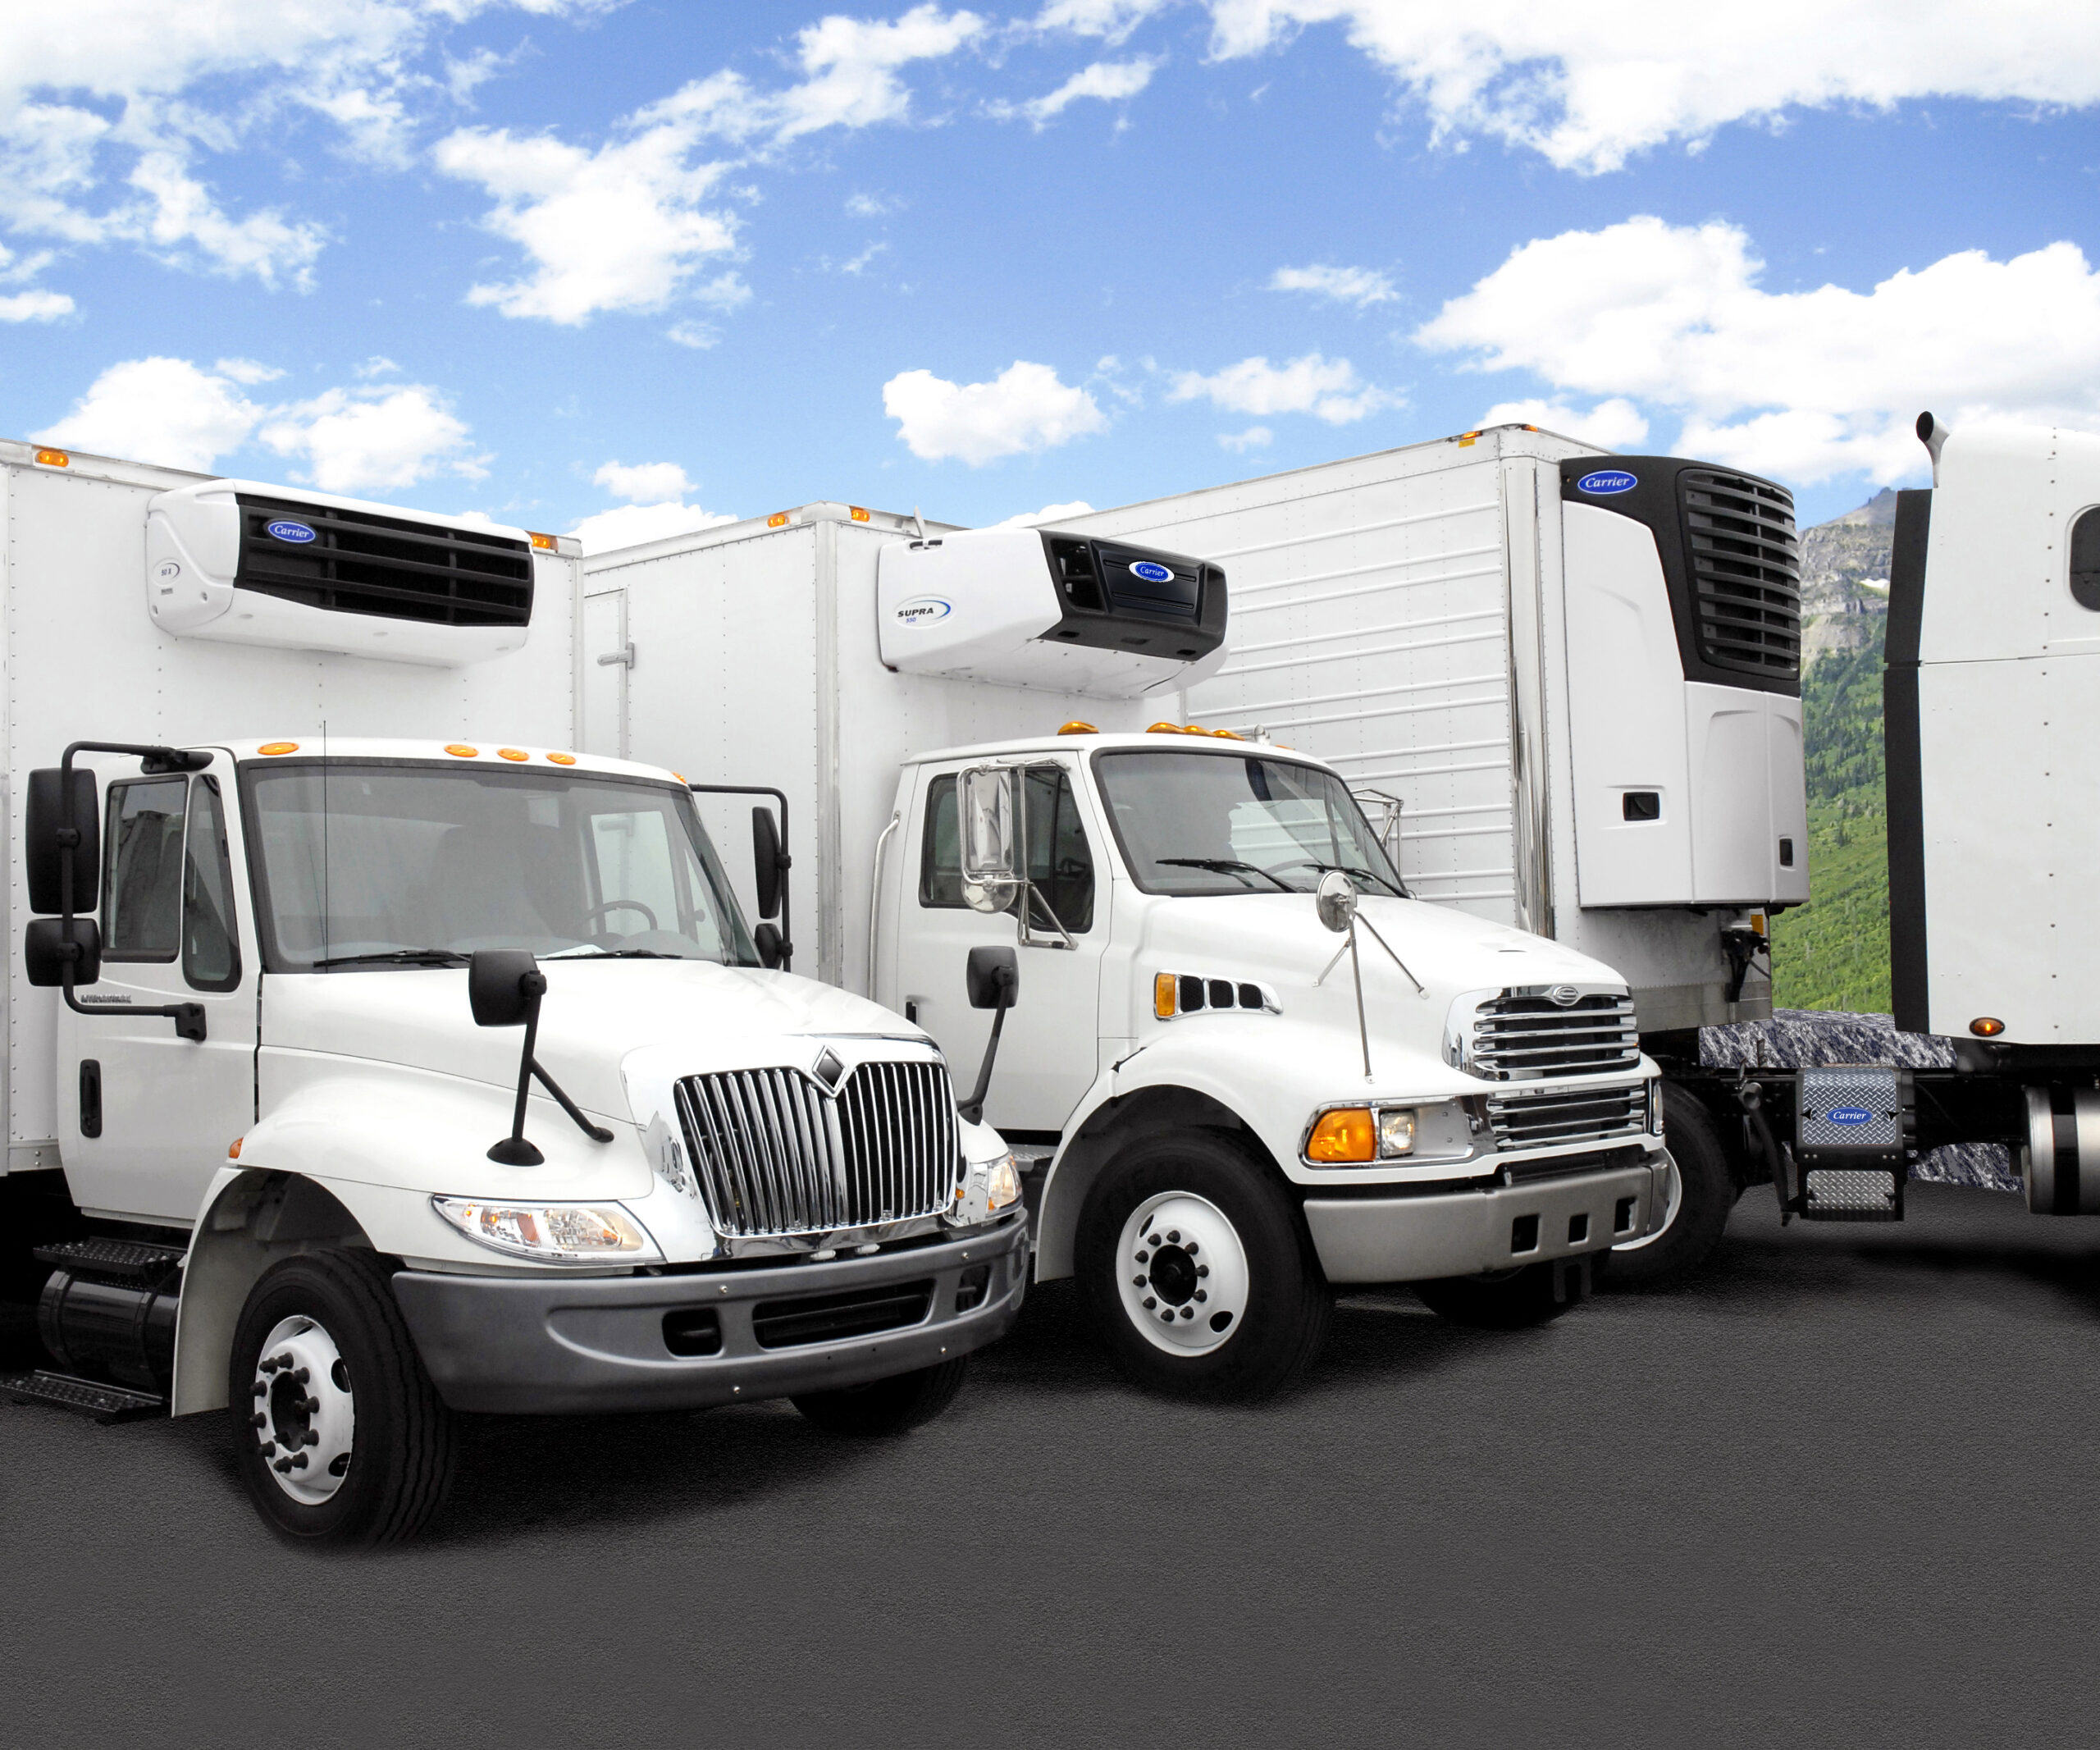 Carrier Truck and Trailer Units Product Family